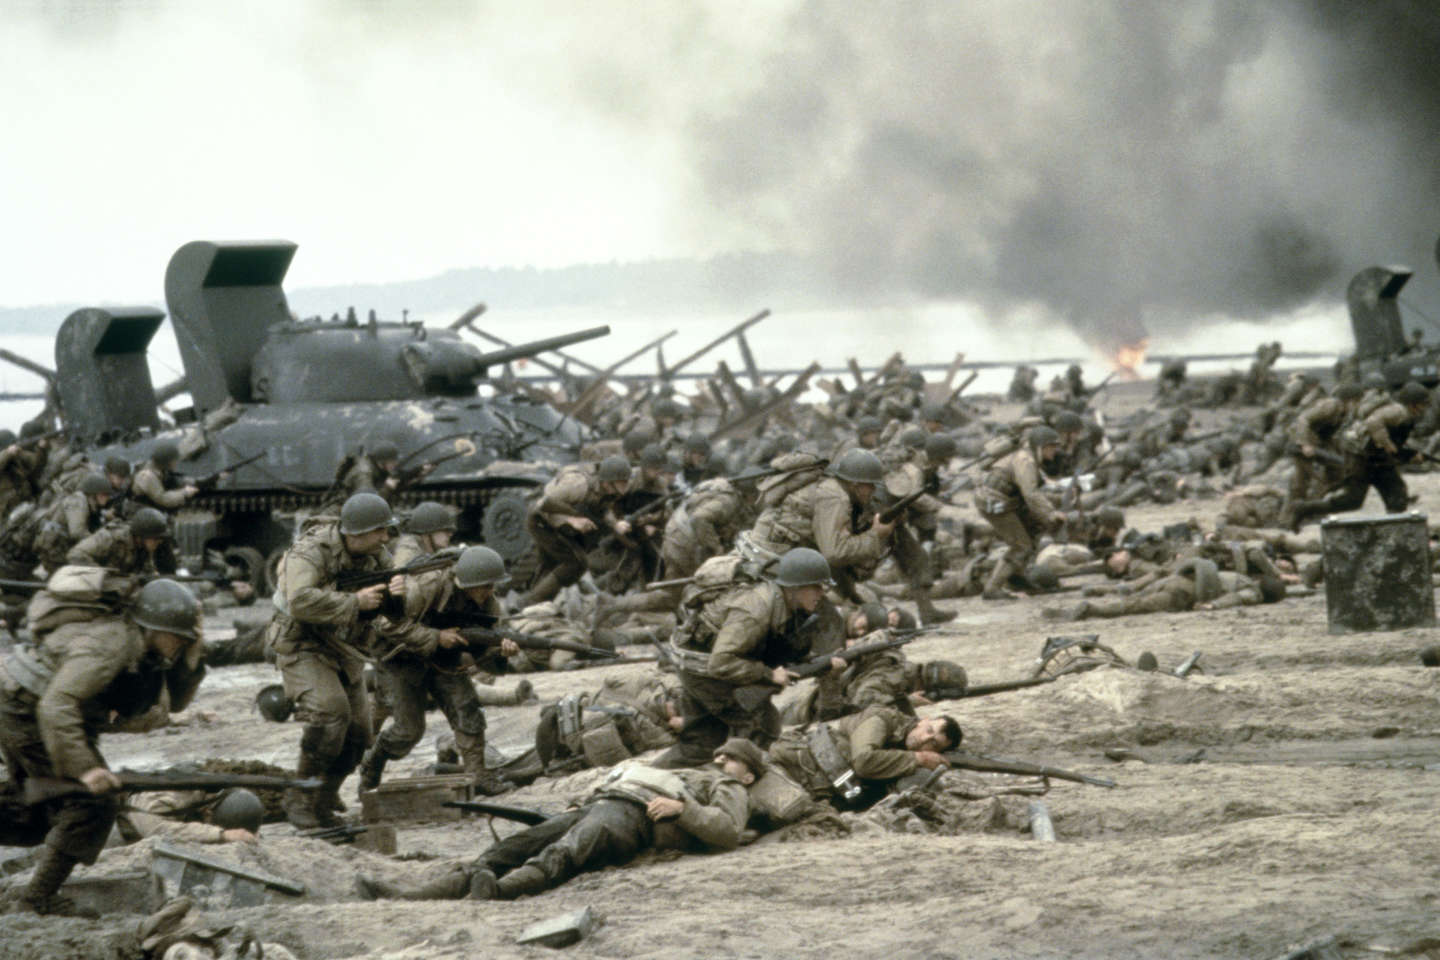 “We must save Private Ryan”, on Paris Première: Steven Spielberg’s “monument” to the veterans of the D-Day